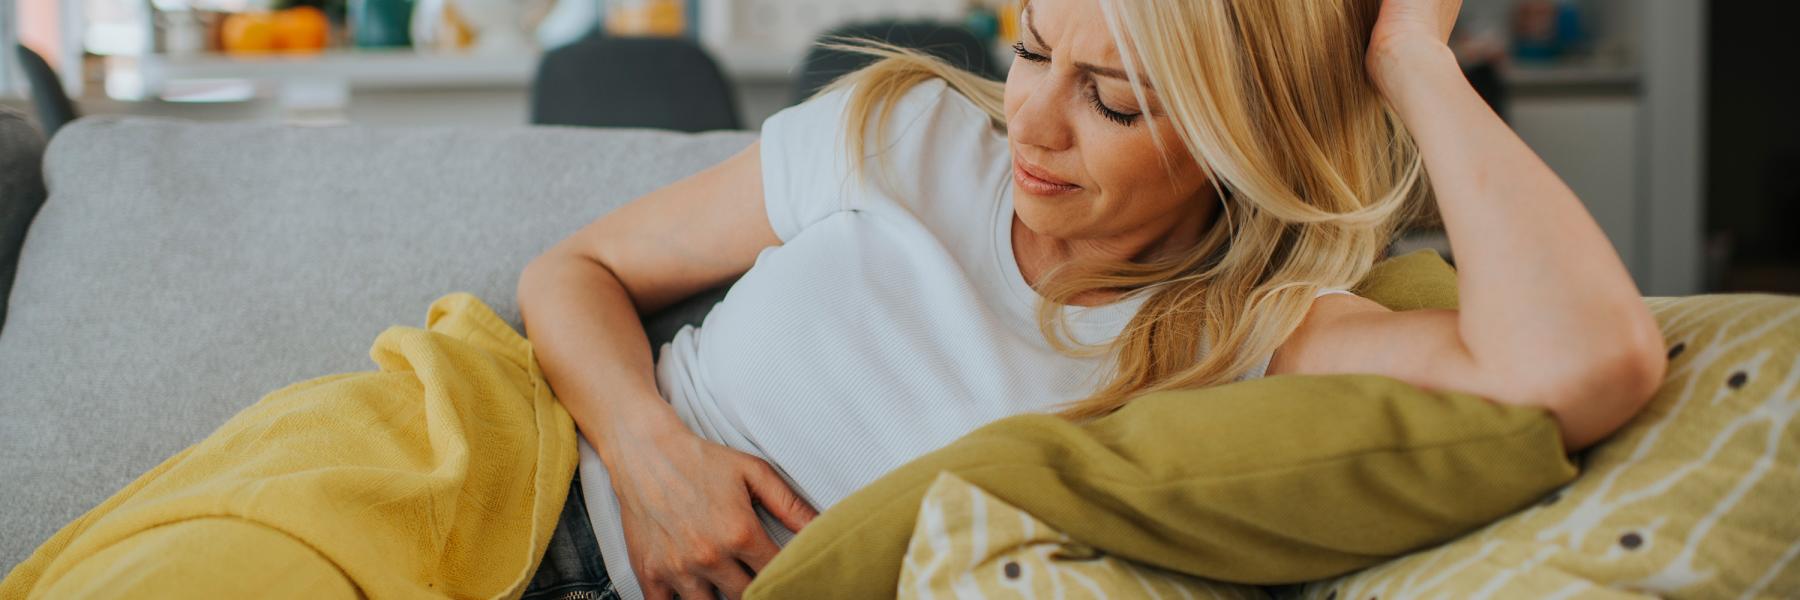 Woman showing signs of discomfort with endo pelvic pain